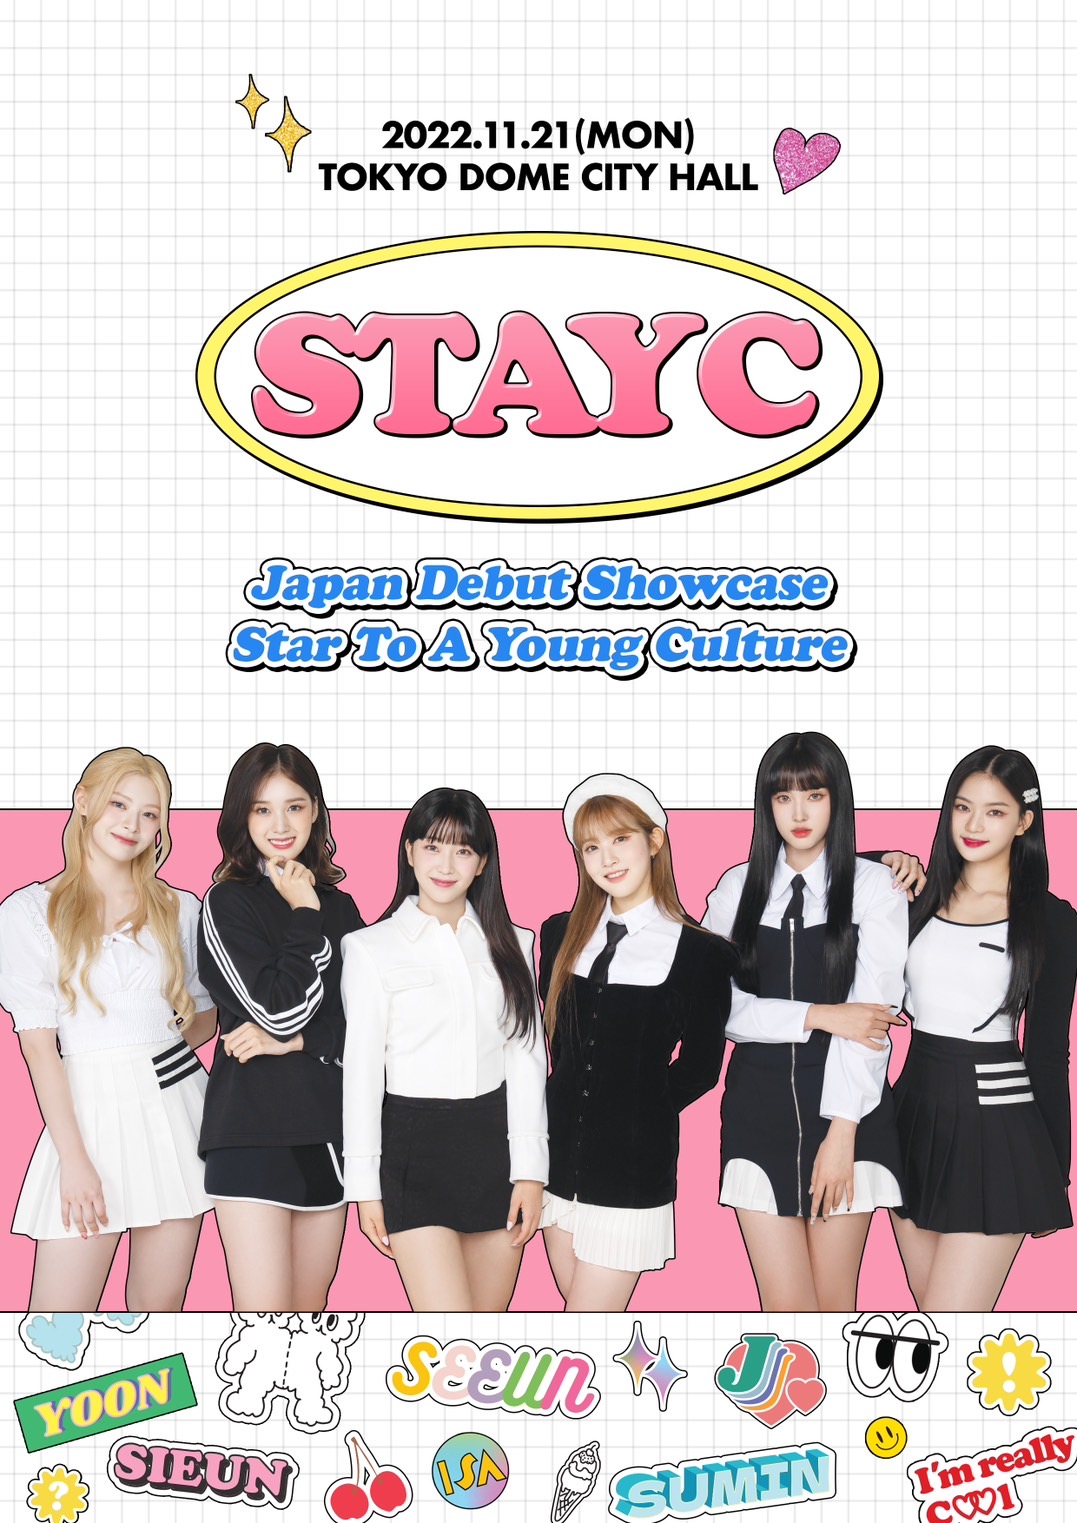 「STAYC Japan Debut Showcase～Star To A Young Culture～」